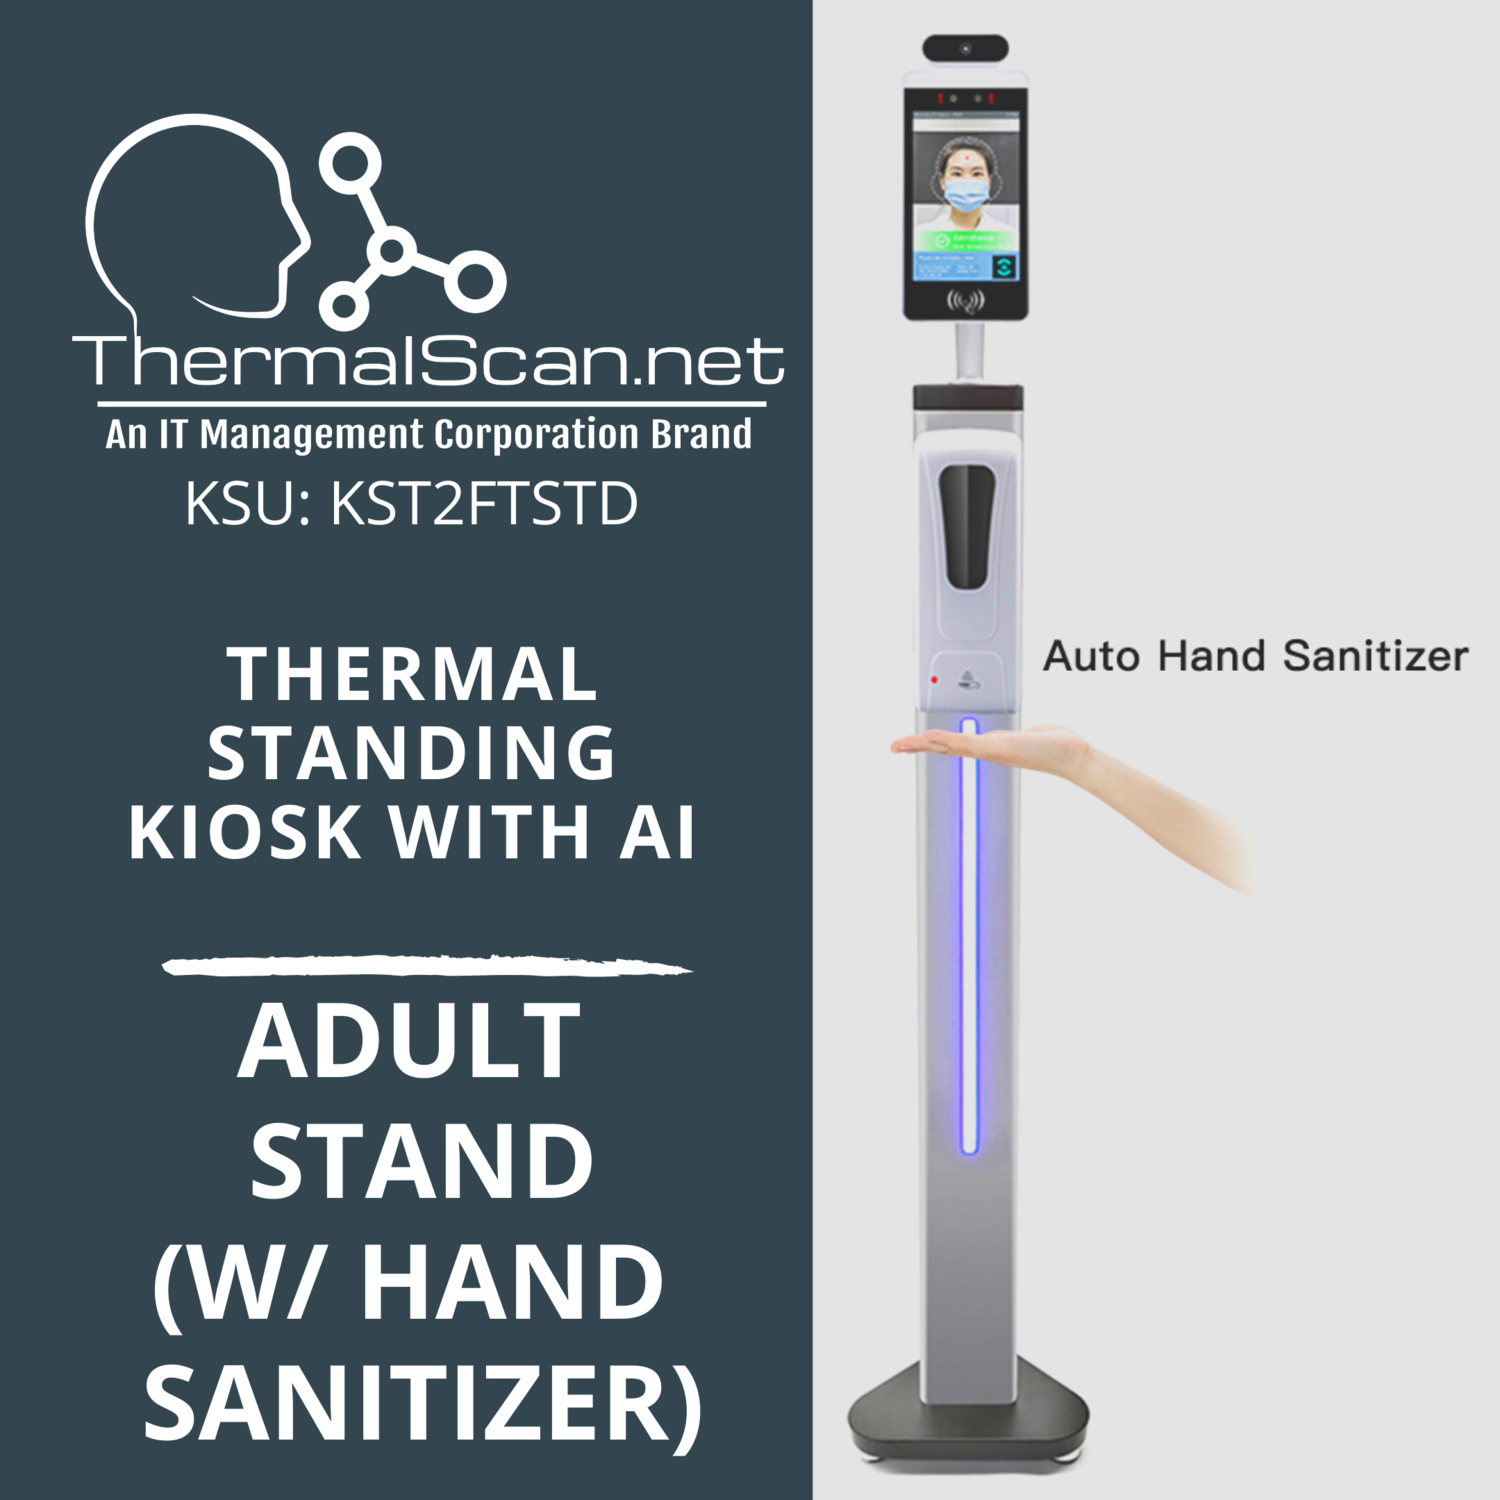 Adult Stand w/ Hand Sanitizer for Temperature Scanning Kiosk